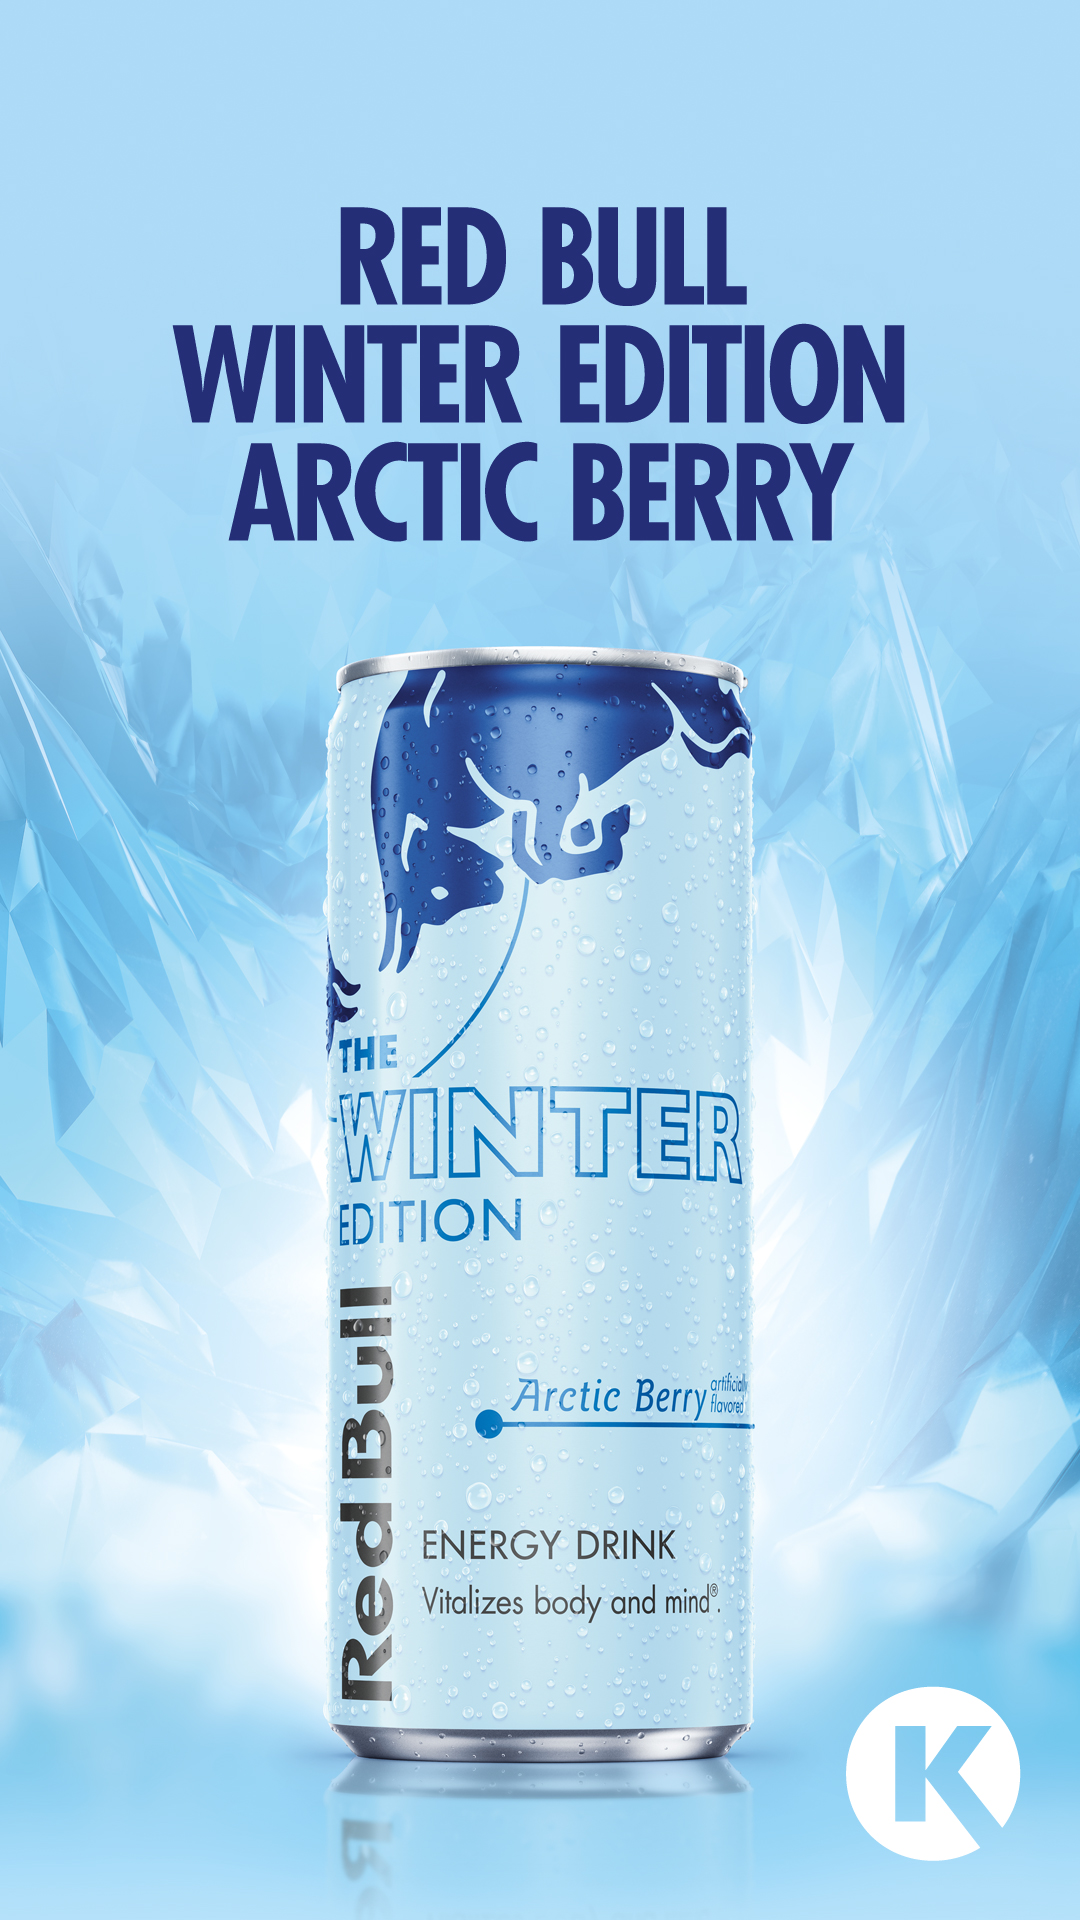 Circle K Stores on Twitter: "Kickstart your Winter with the new Red Bull Winter Edition Berry. Head to your nearest Circle K to try it before everyone else! https://t.co/x7zIFYiiGE https://t.co/lFIgKOkz8Q" /